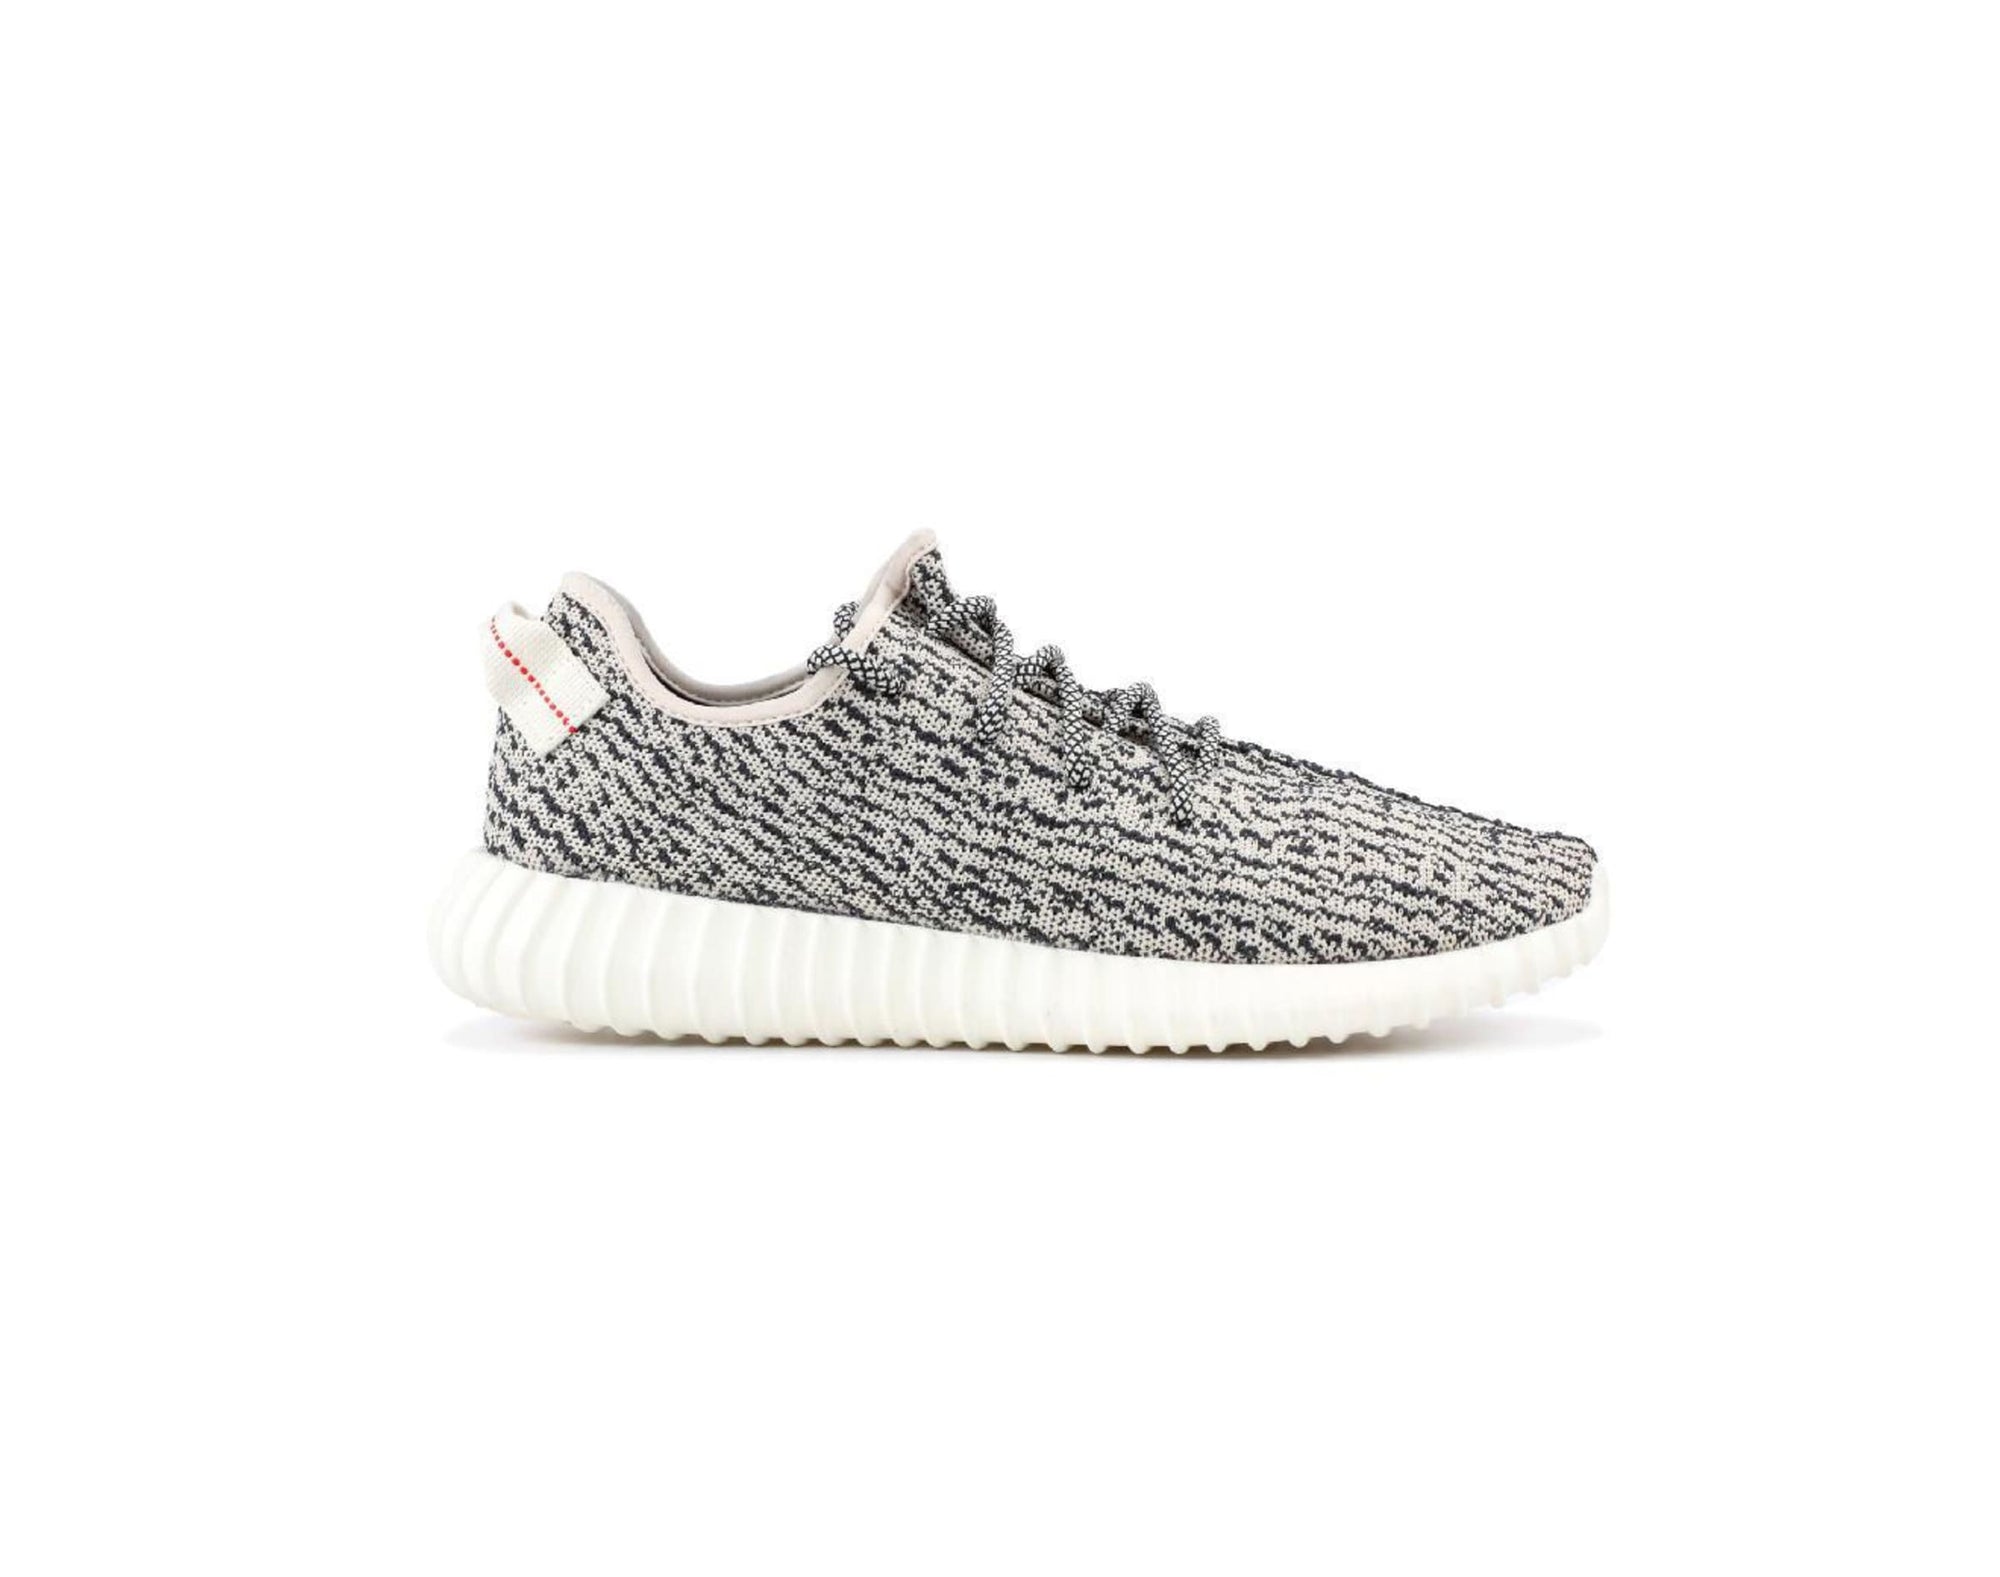 YEEZY Boost 350 ‘Turtle Dove’ Set to Re-release in 2022